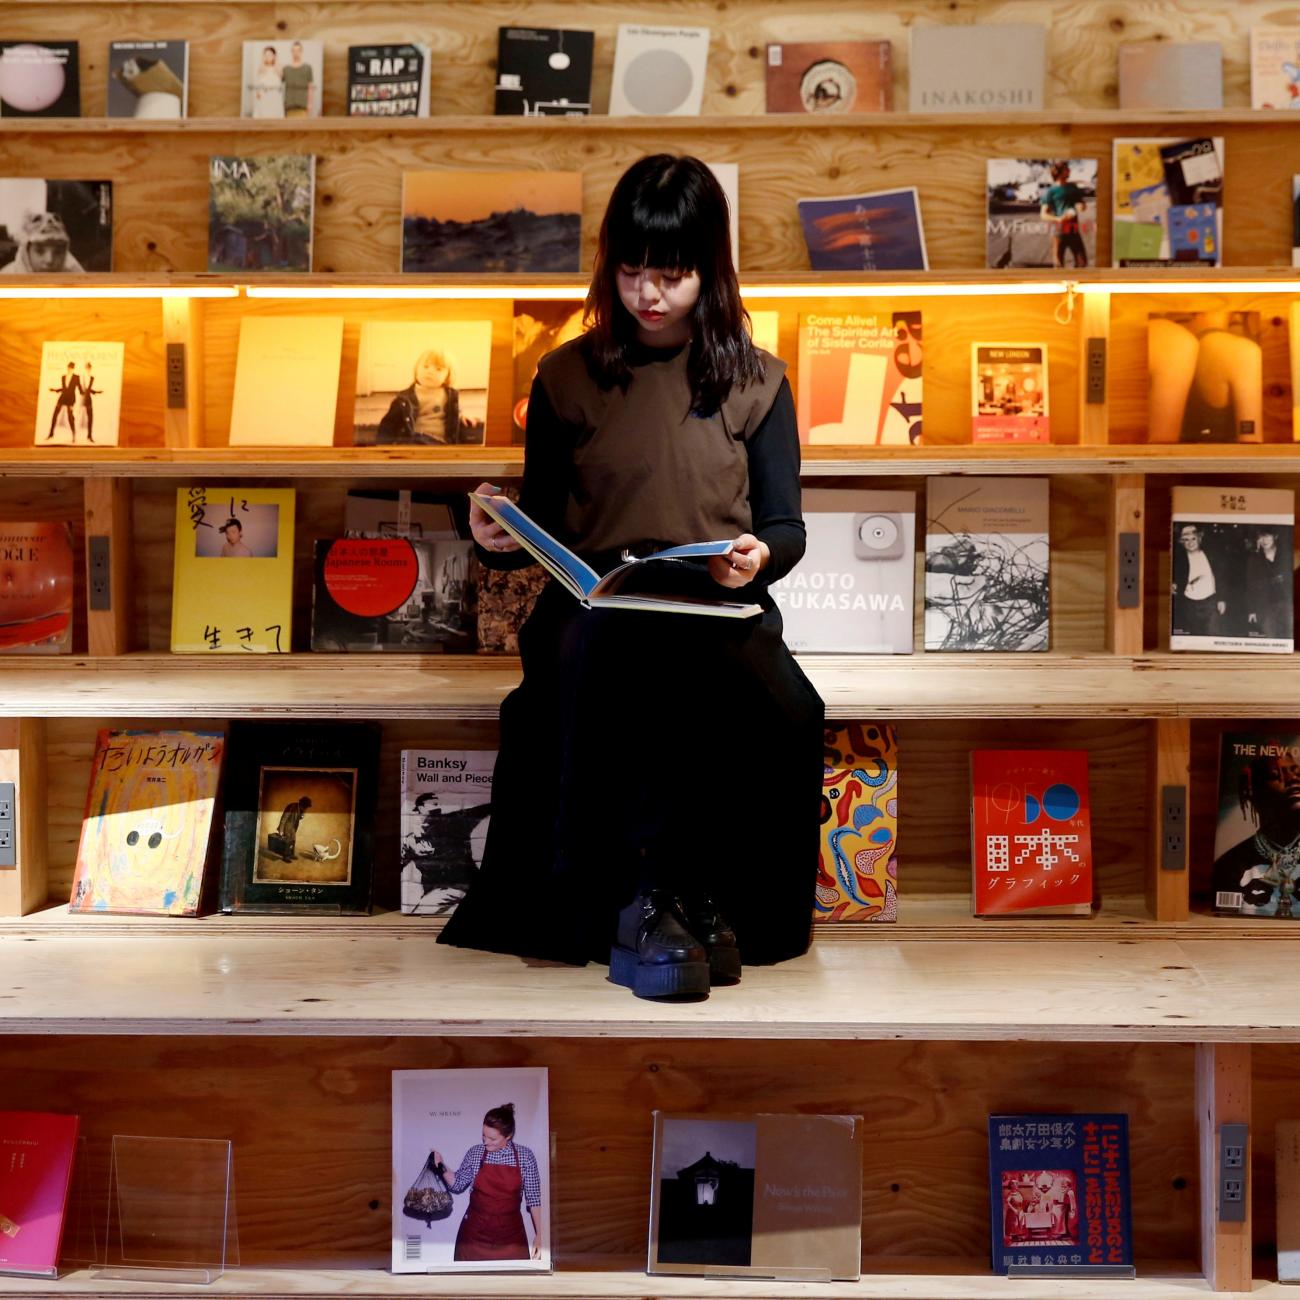 A woman reads a book at the Shinjuku branch of Book and Bed, an accommodation combined with book cafe where guests can sleep in hidden bunks built into a large bookshelf, during a photo opportunity in Tokyo, Japan September 14, 2018.